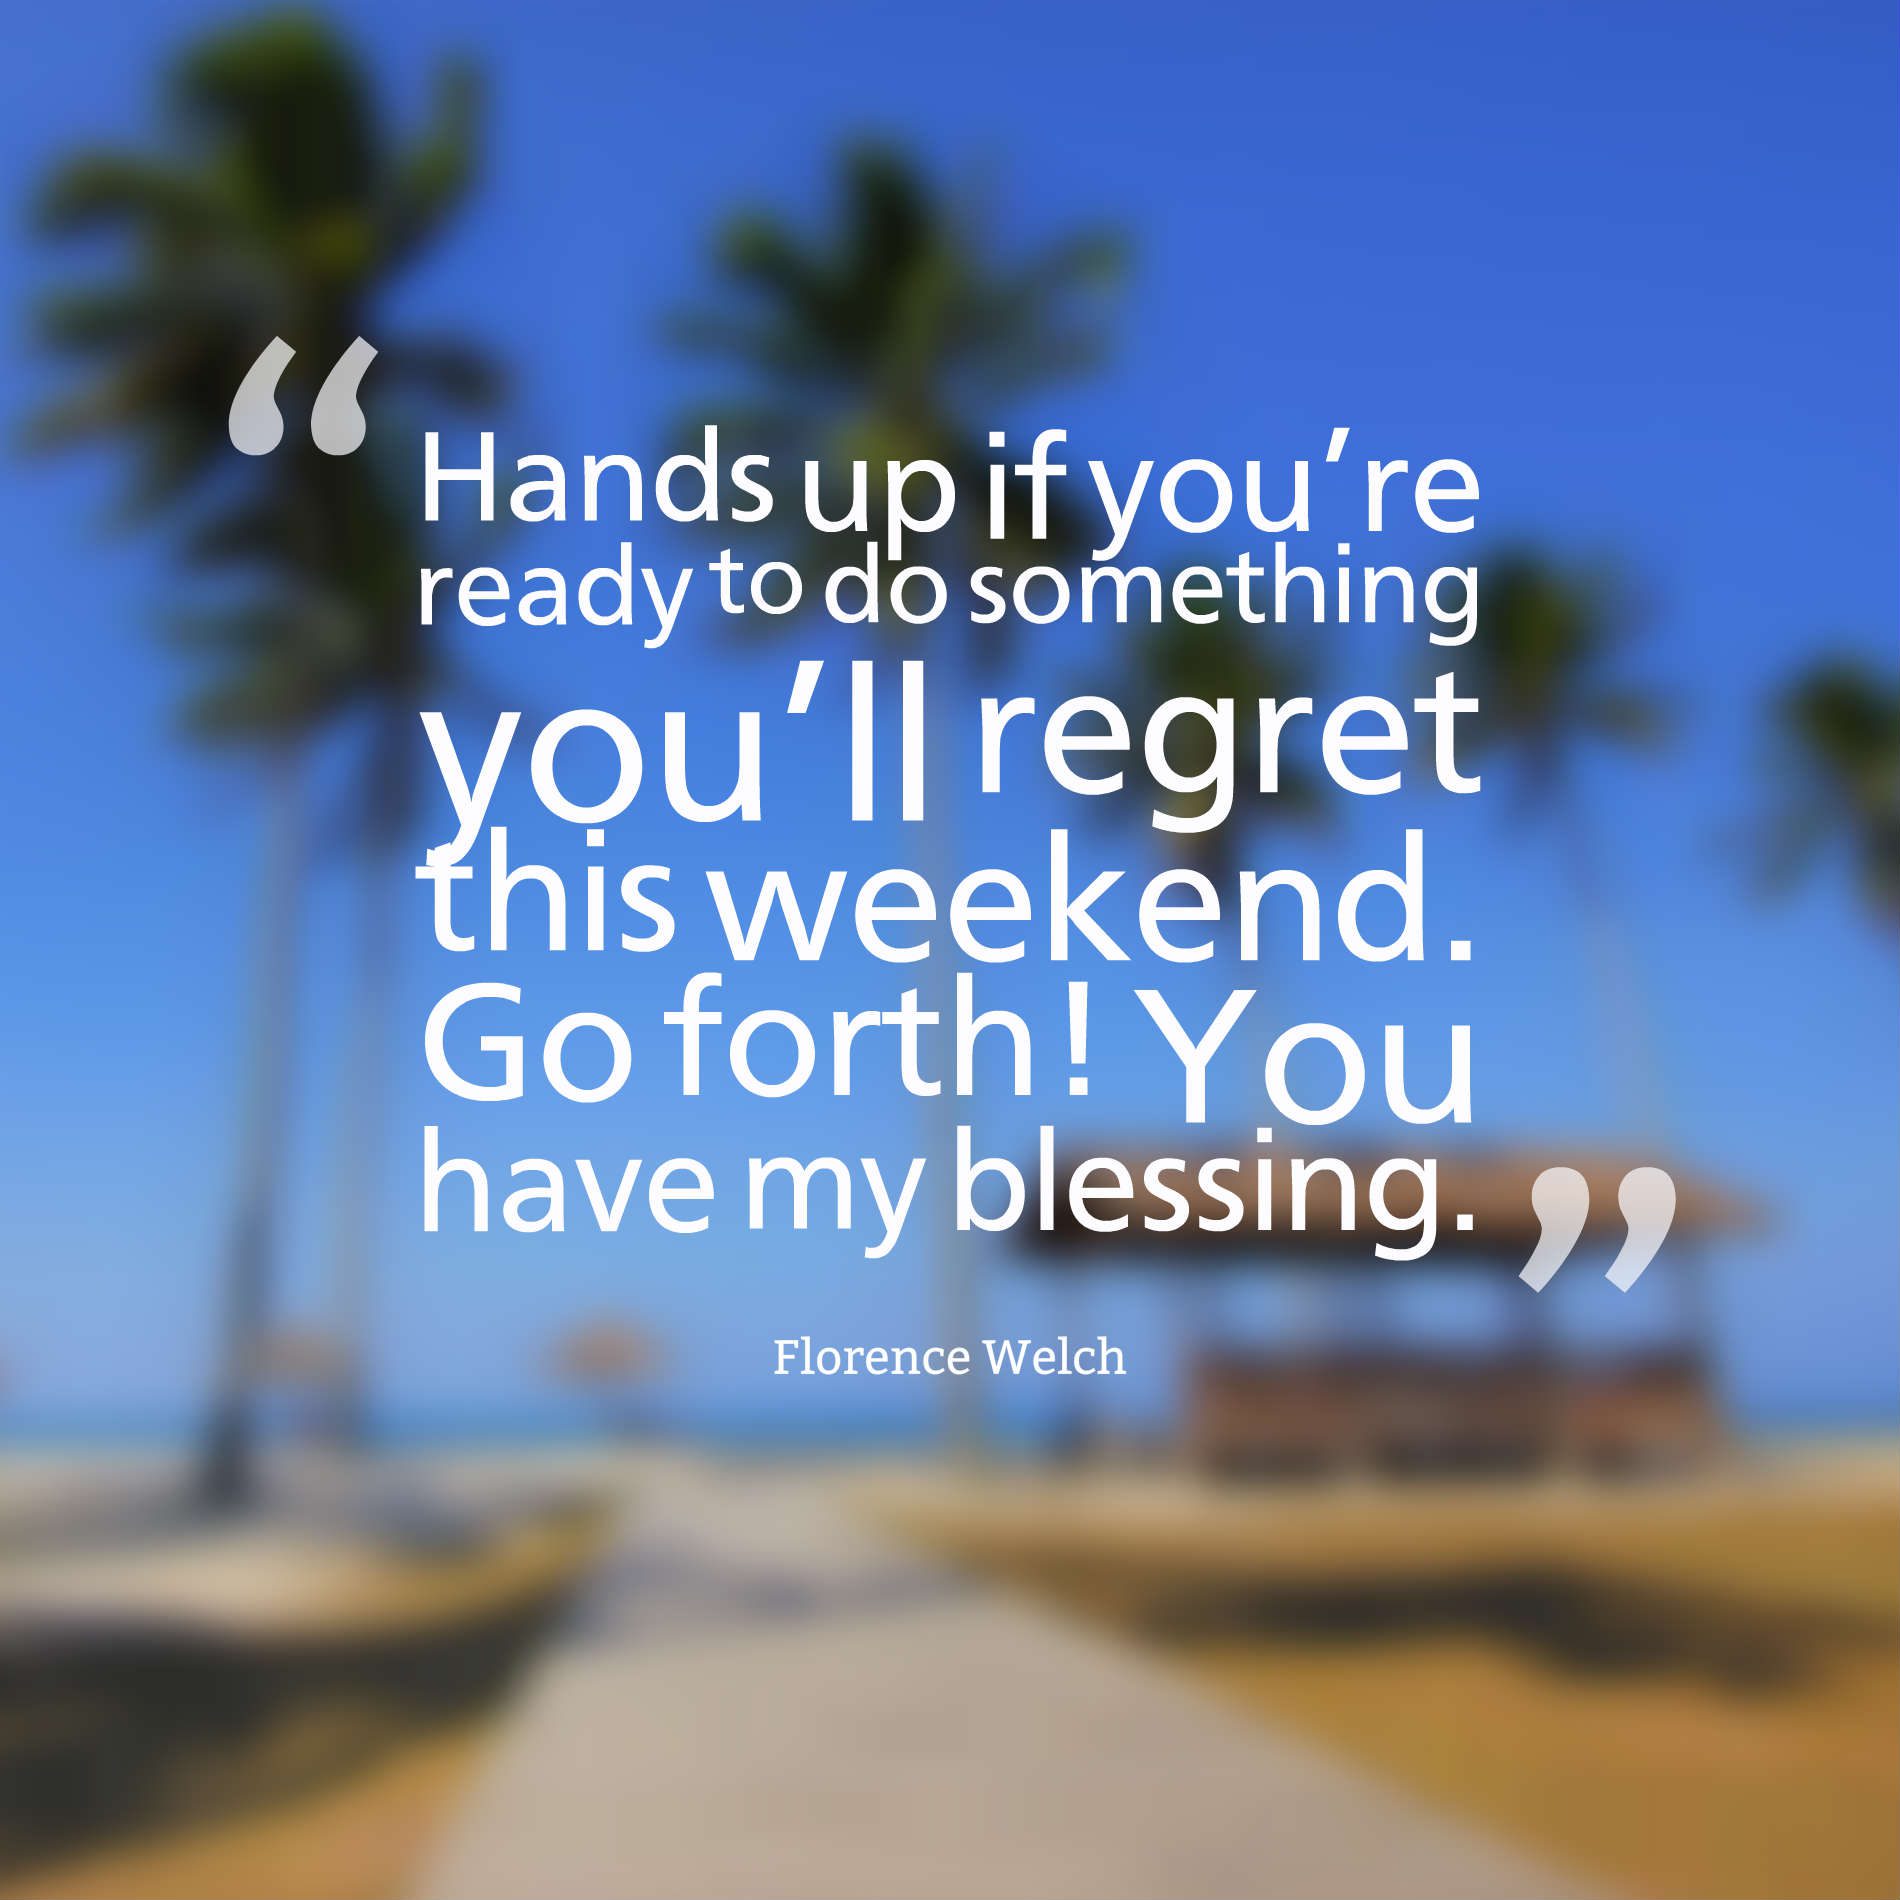 Hands up if you’re ready to do something you’ll regret this weekend. Go forth! You have my blessing.